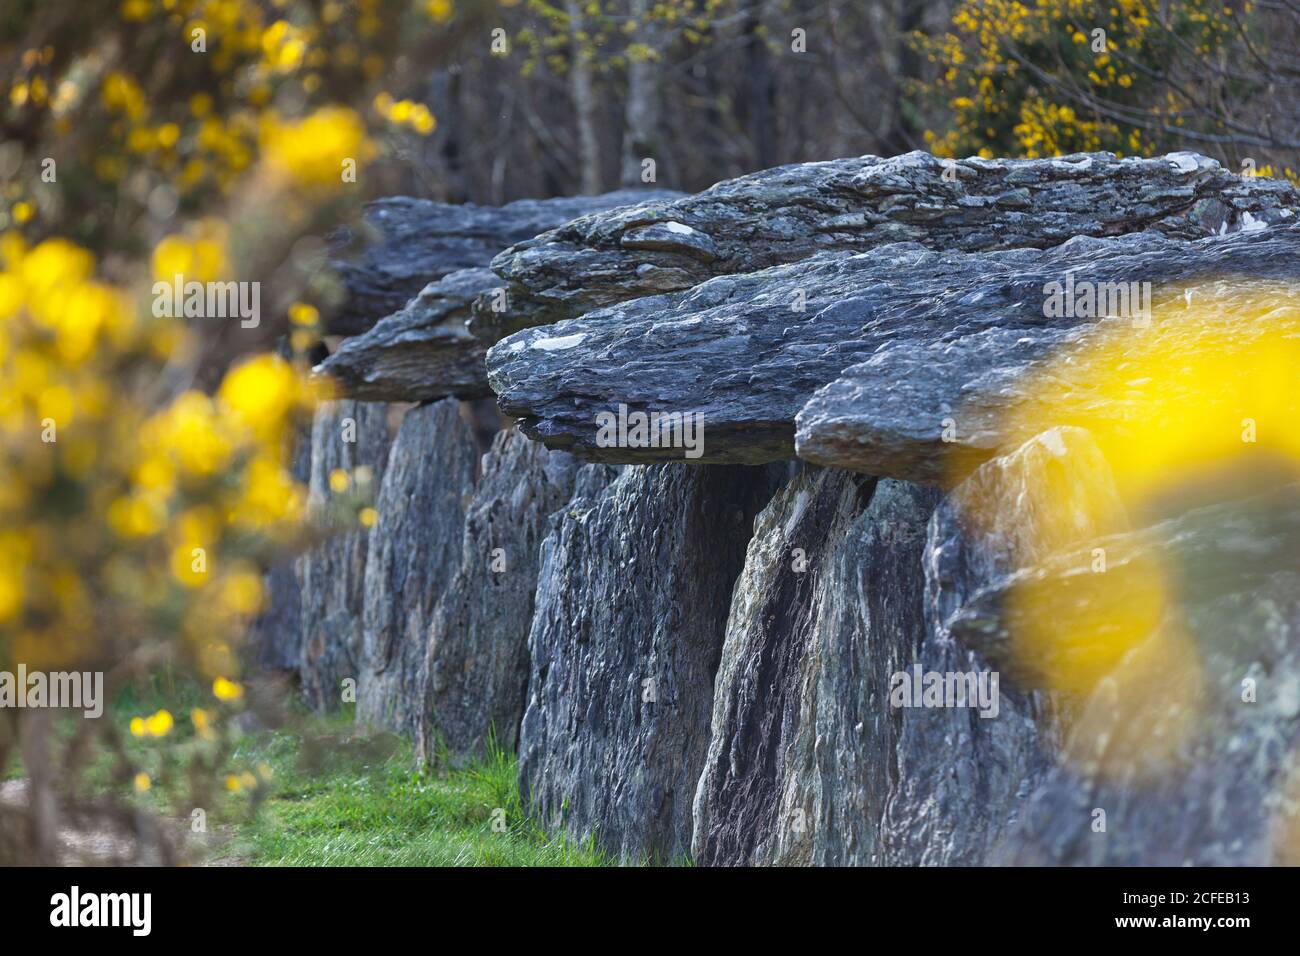 Relic from the megalithic period, the dolmens of Treal near the famous megalithic site of Saint Just in Brittany. Stock Photo